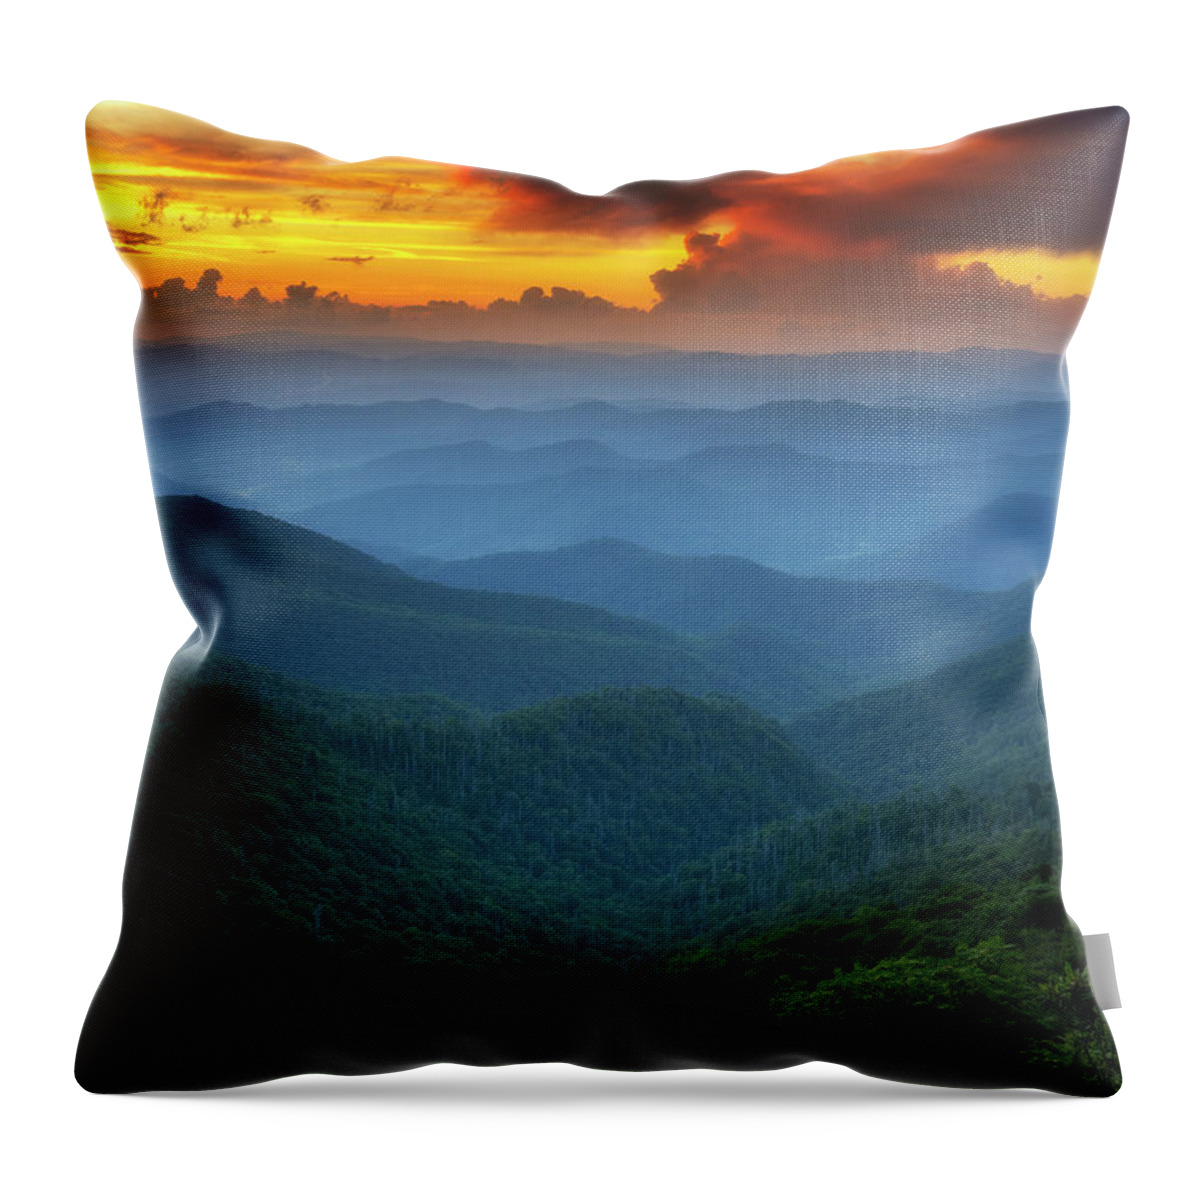 Sunset Over The Bleue Ridge Mountains Throw Pillow featuring the photograph Sunset Over The Blue Ridge Mountains Vertical by Mark Papke